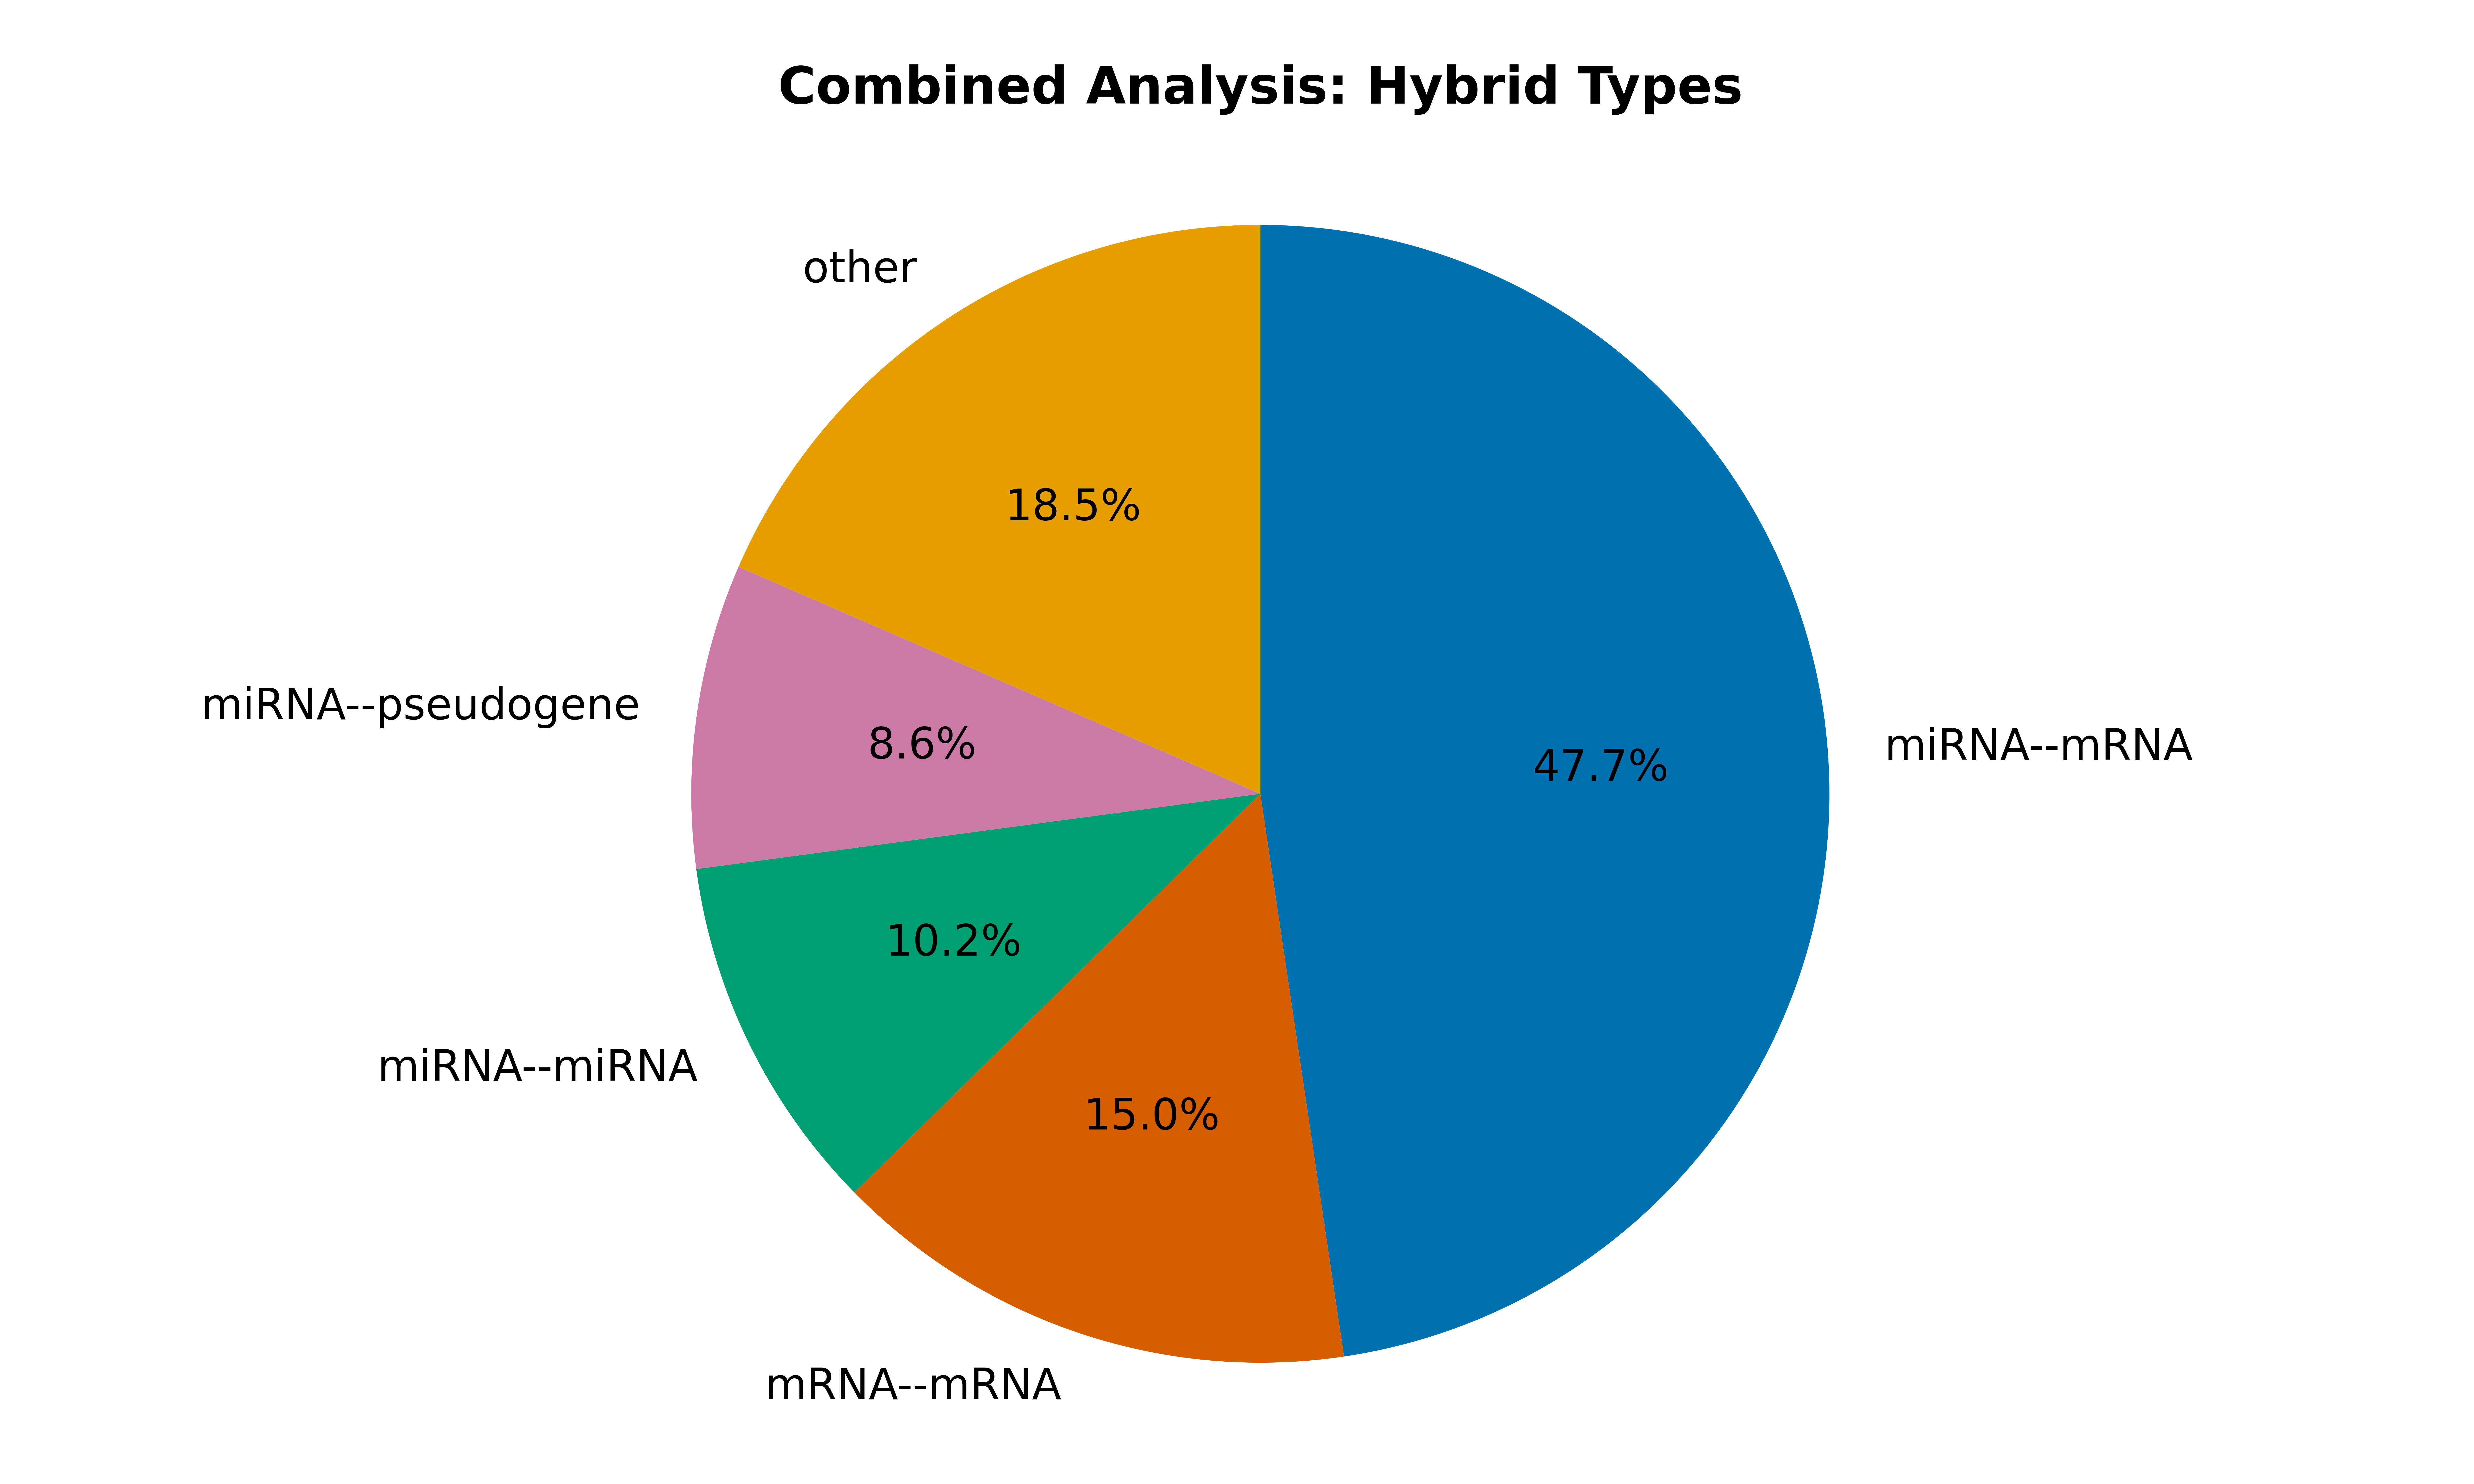 _images/combined_analysis_types_hybrid_types.png